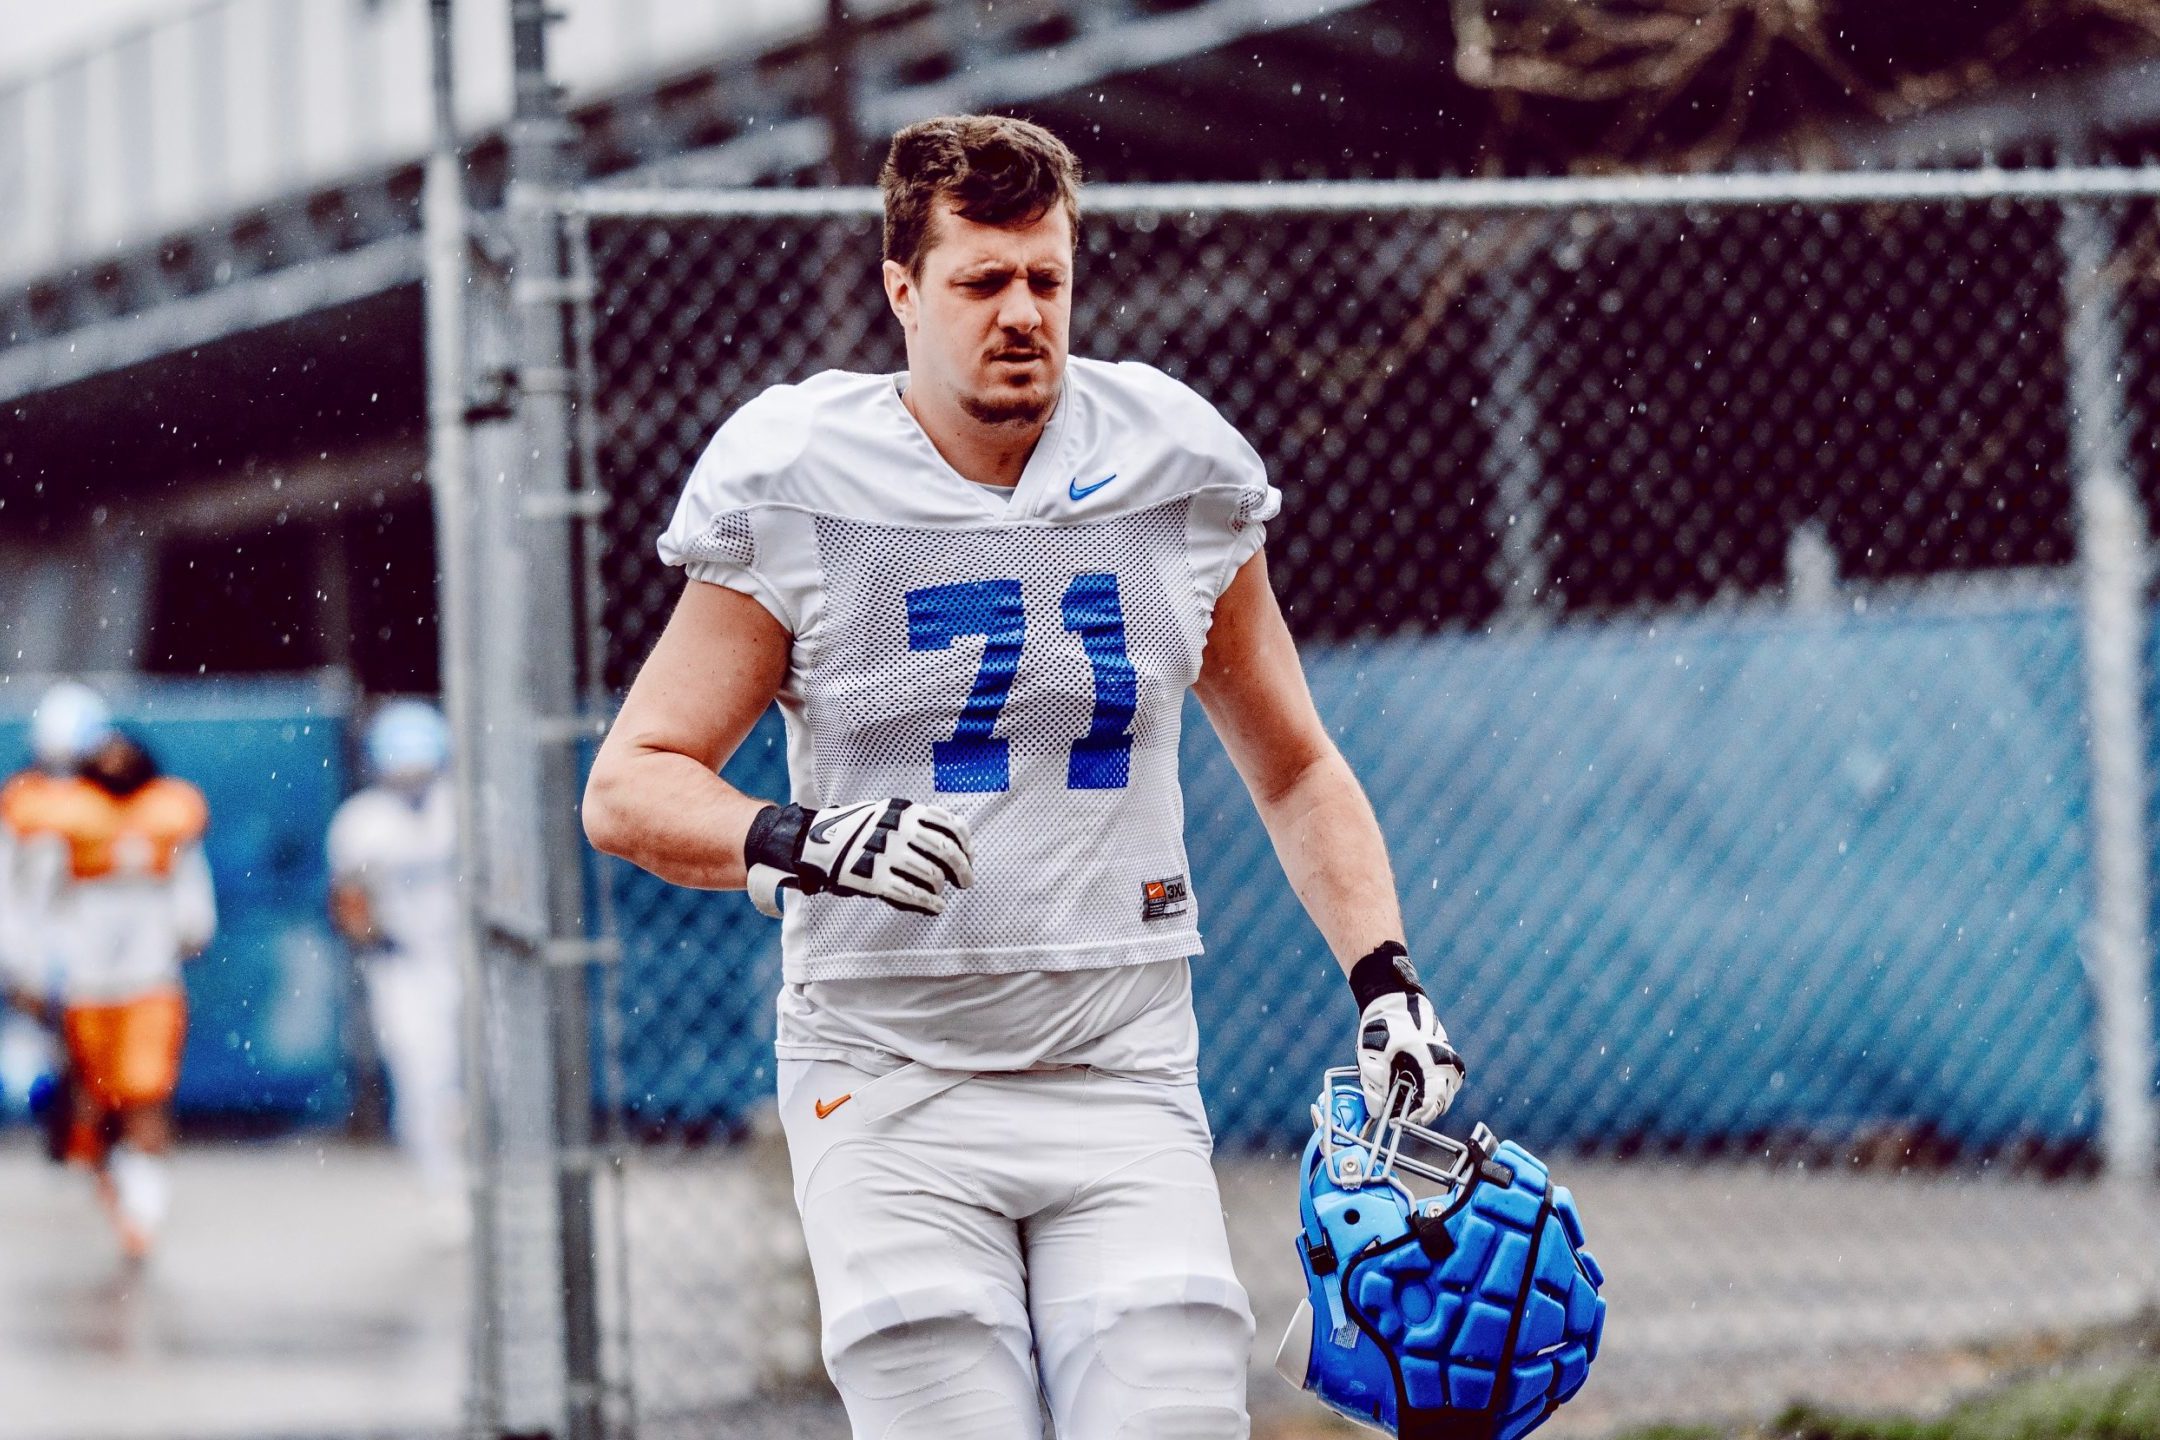 Cade Beresford the mauling Offensive Tackle from Boise State is a player to keep an eye on in 2023. Check out this scouting report